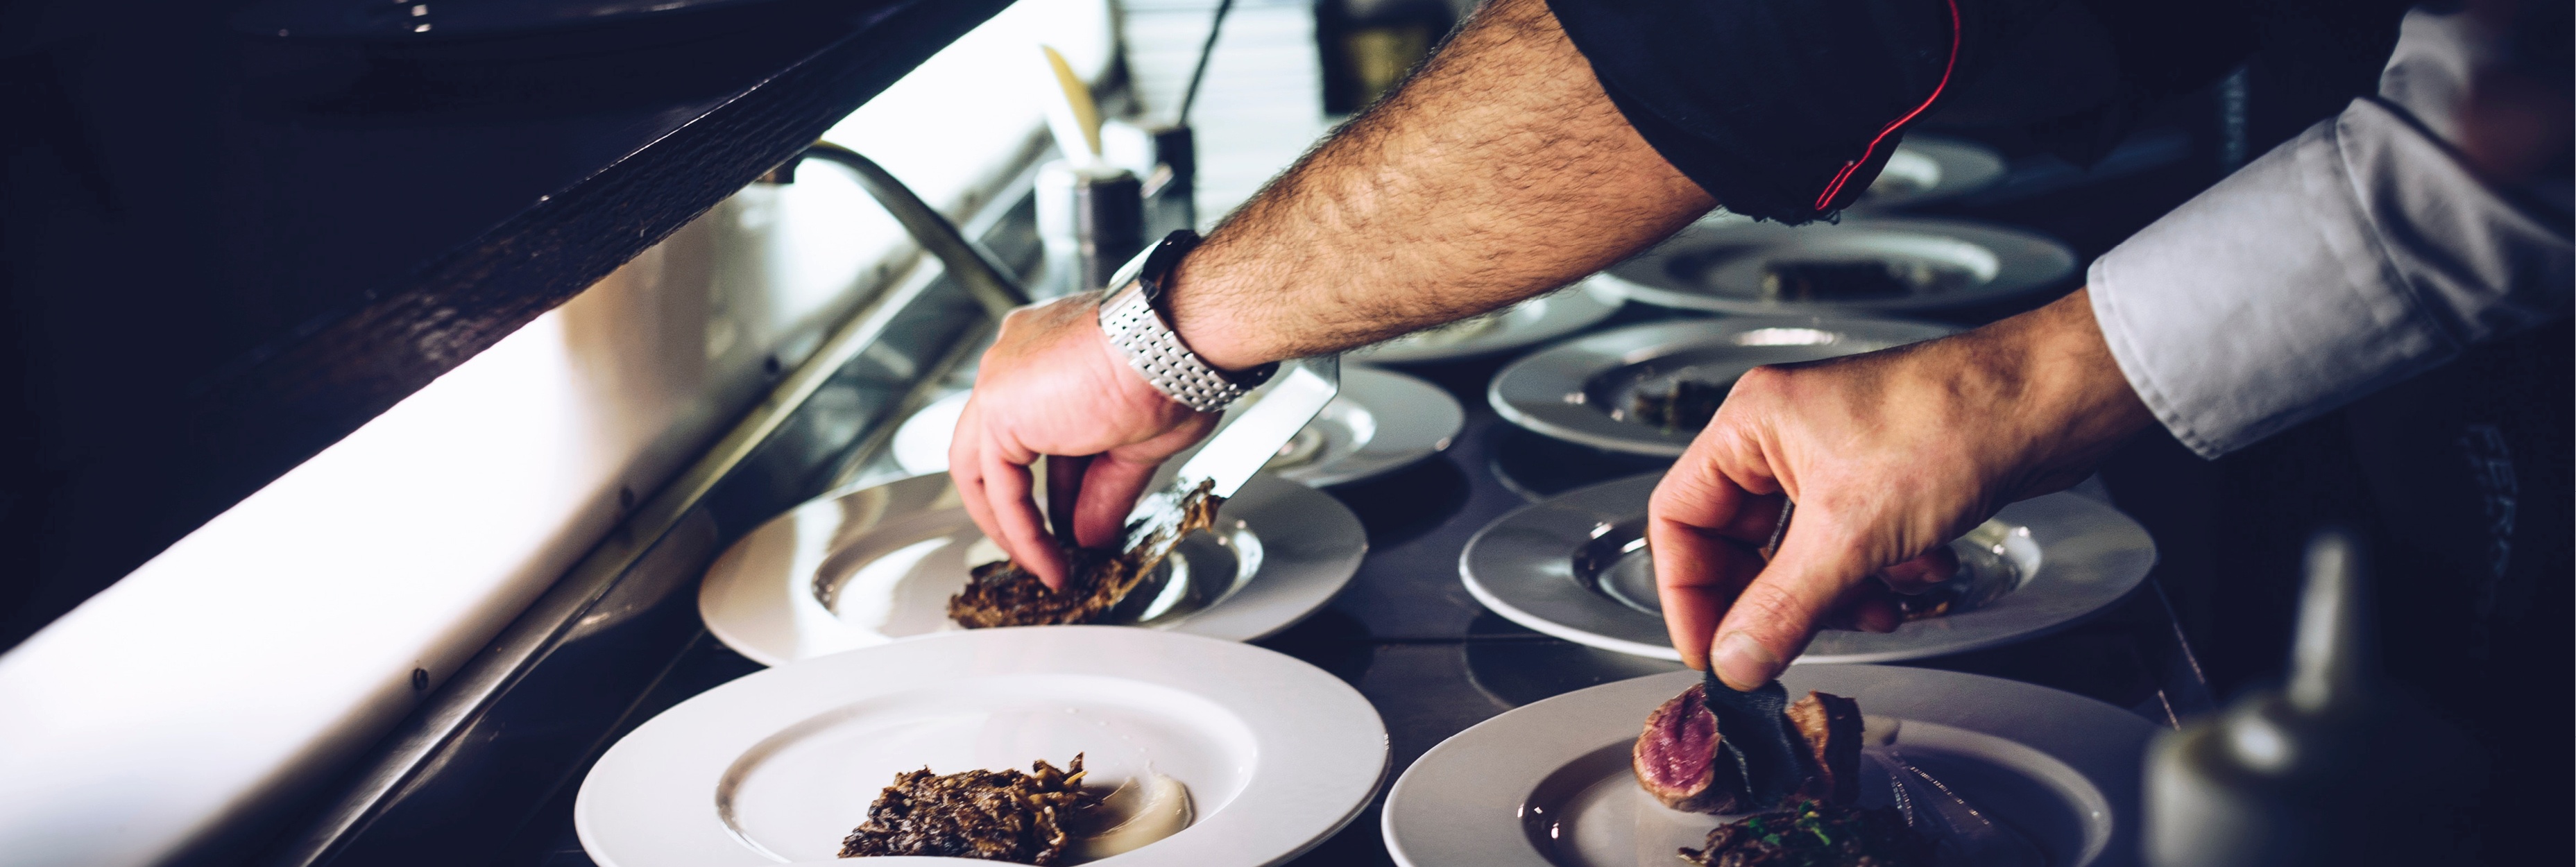 Three Trends Likely To Affect The Hospitality And Foodservice Sector in 2016